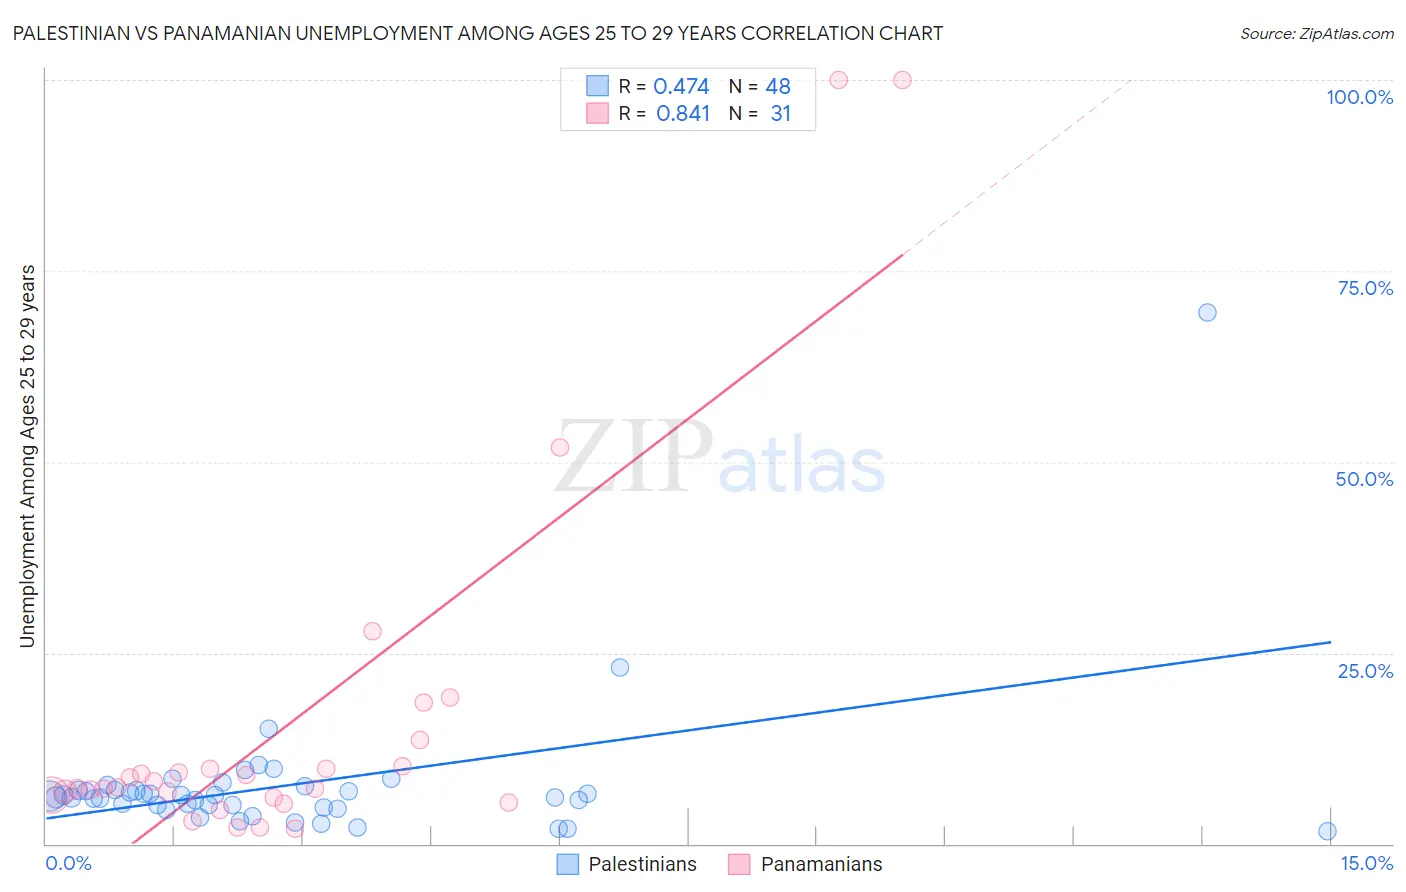 Palestinian vs Panamanian Unemployment Among Ages 25 to 29 years